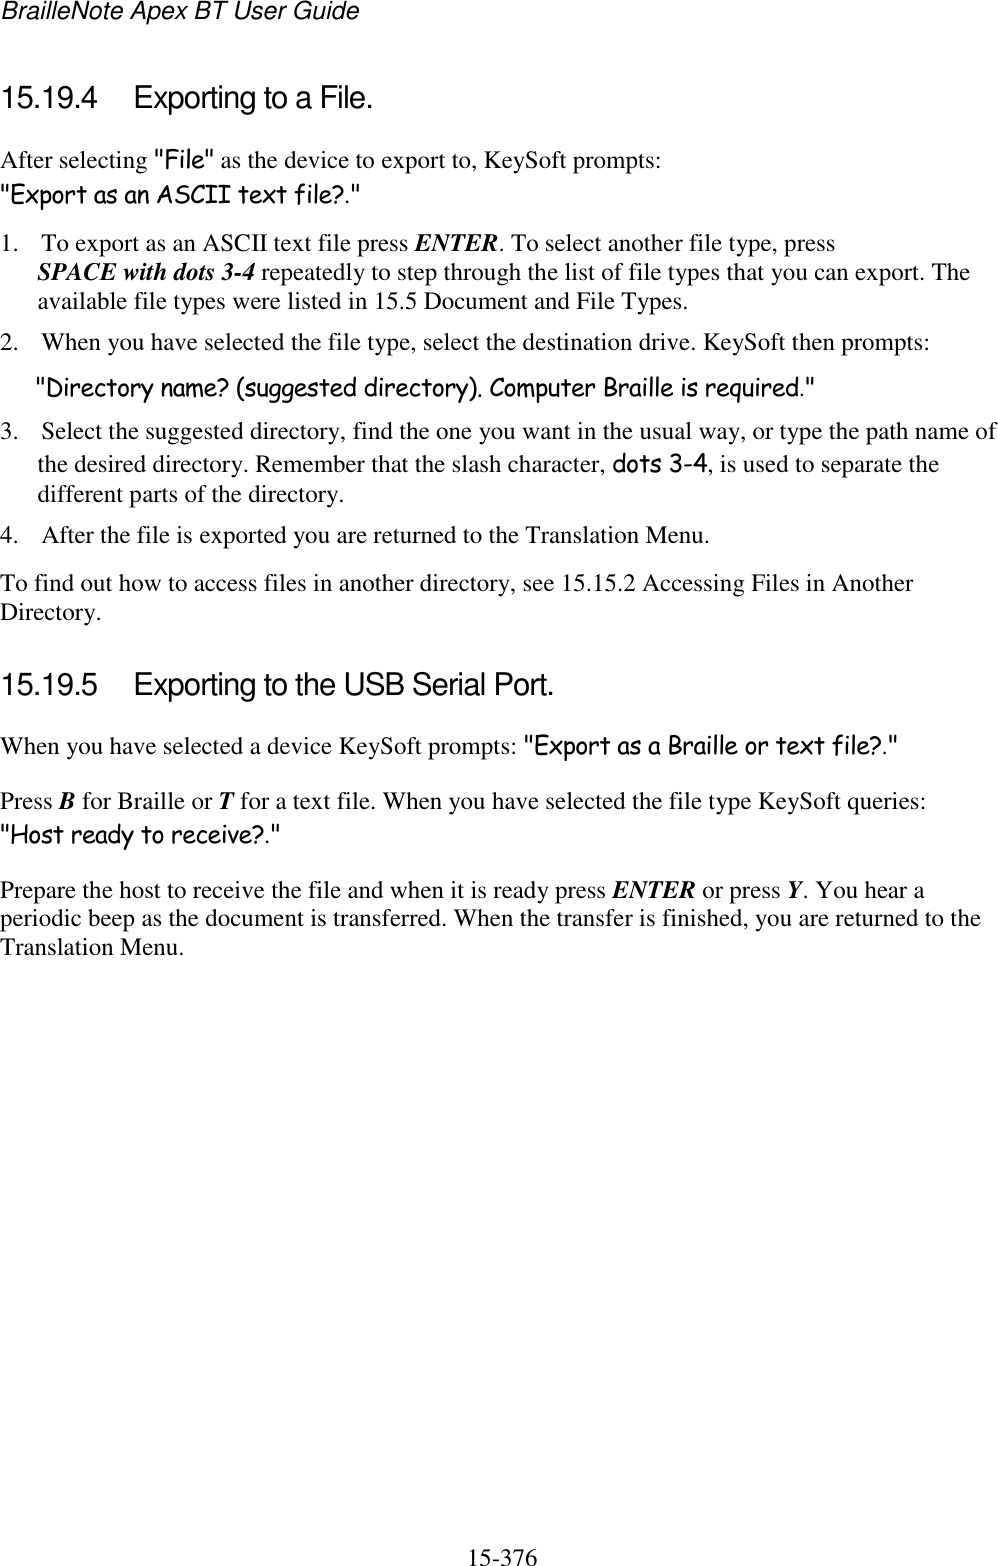 BrailleNote Apex BT User Guide   15-376   15.19.4  Exporting to a File. After selecting &quot;File&quot; as the device to export to, KeySoft prompts: &quot;Export as an ASCII text file?.&quot; 1. To export as an ASCII text file press ENTER. To select another file type, press SPACE with dots 3-4 repeatedly to step through the list of file types that you can export. The available file types were listed in 15.5 Document and File Types. 2. When you have selected the file type, select the destination drive. KeySoft then prompts: &quot;Directory name? (suggested directory). Computer Braille is required.&quot; 3. Select the suggested directory, find the one you want in the usual way, or type the path name of the desired directory. Remember that the slash character, dots 3-4, is used to separate the different parts of the directory. 4. After the file is exported you are returned to the Translation Menu. To find out how to access files in another directory, see 15.15.2 Accessing Files in Another Directory.  15.19.5  Exporting to the USB Serial Port. When you have selected a device KeySoft prompts: &quot;Export as a Braille or text file?.&quot; Press B for Braille or T for a text file. When you have selected the file type KeySoft queries: &quot;Host ready to receive?.&quot; Prepare the host to receive the file and when it is ready press ENTER or press Y. You hear a periodic beep as the document is transferred. When the transfer is finished, you are returned to the Translation Menu.   